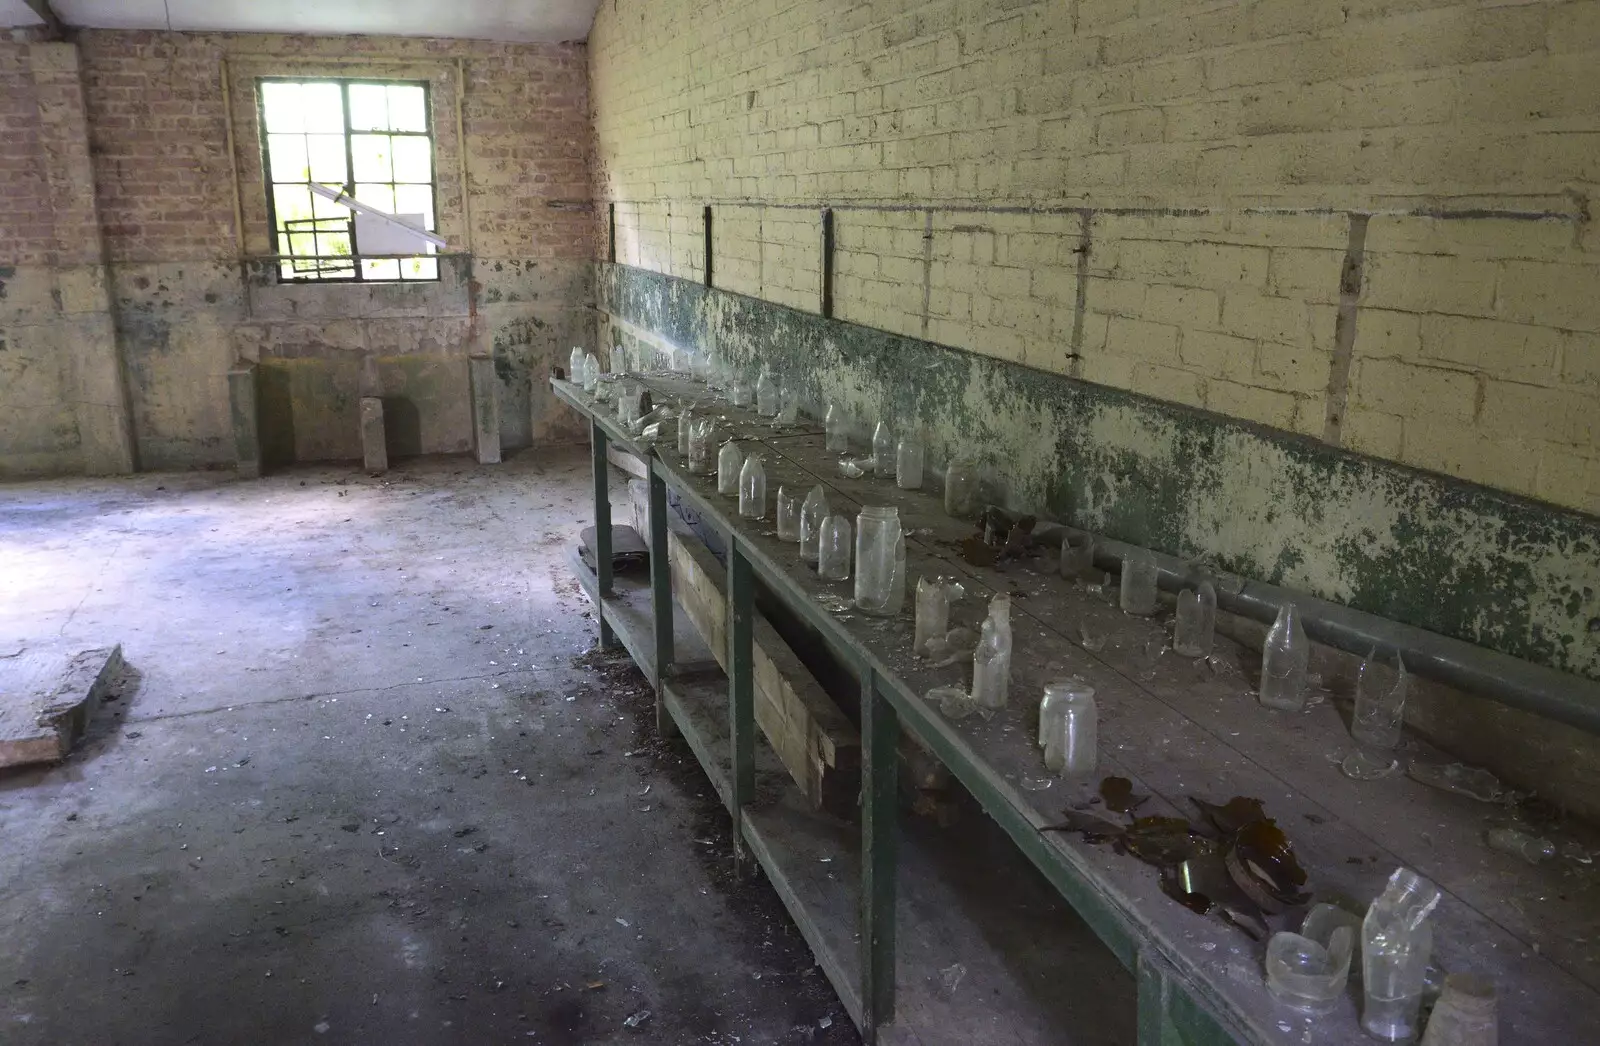 Bottles lined up on a shelf, from A 1940s Timewarp, Site 4, Bungay Airfield, Flixton, Suffolk - 9th June 2022